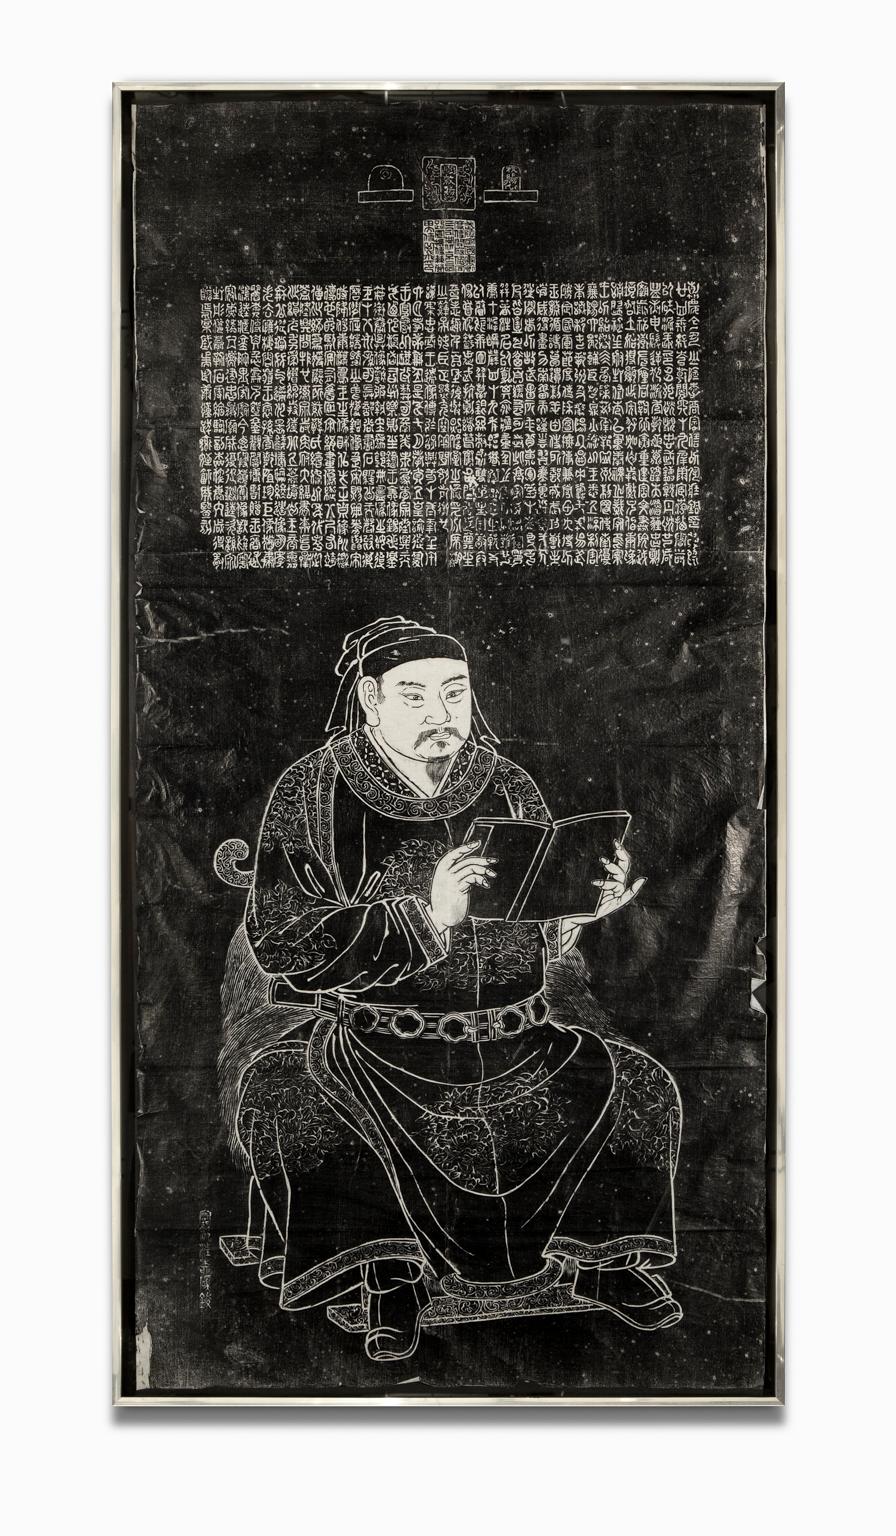 Unknown Portrait Painting - "Yue Fei", Chinese Historical Folk Hero, Late Qing Dynasty Stele Rubbing, Ink